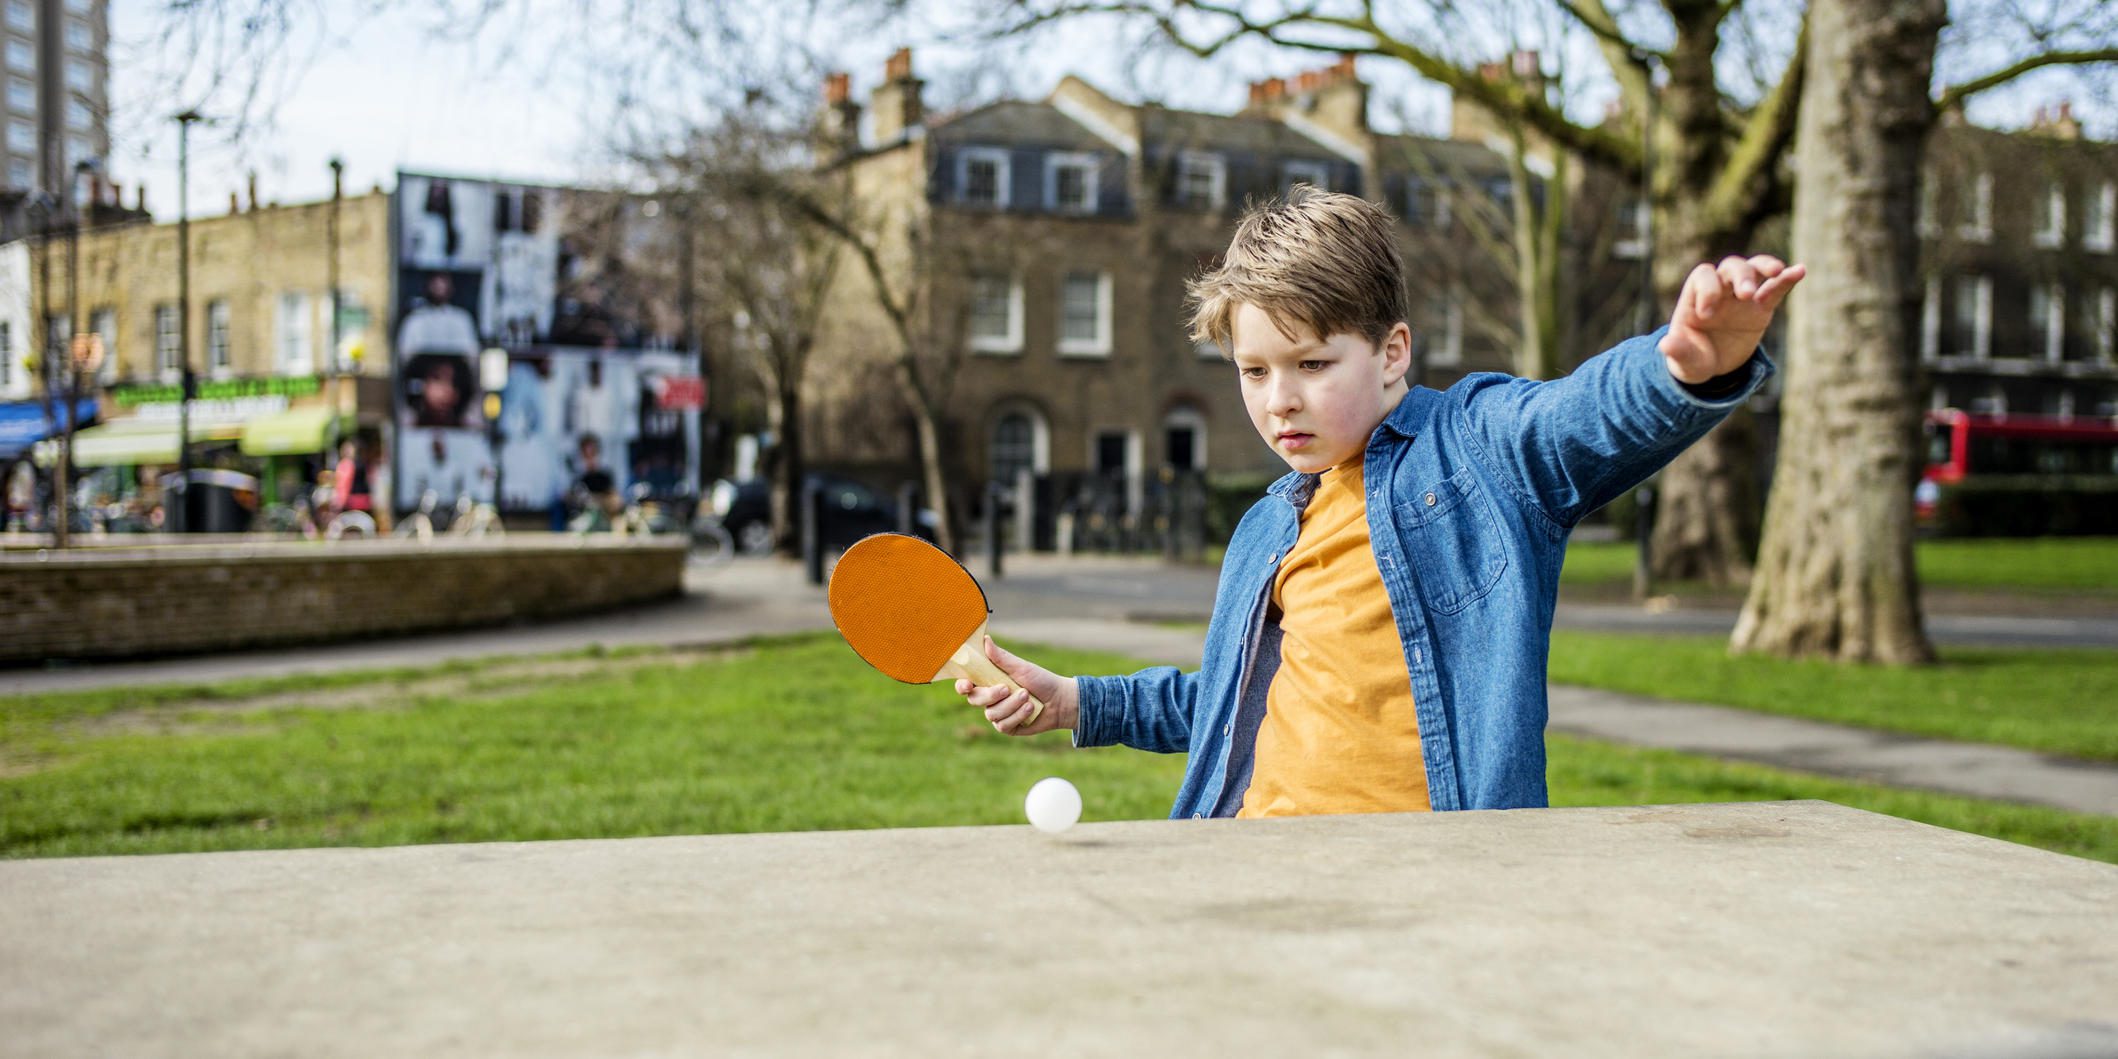 Playing ping pong in the park